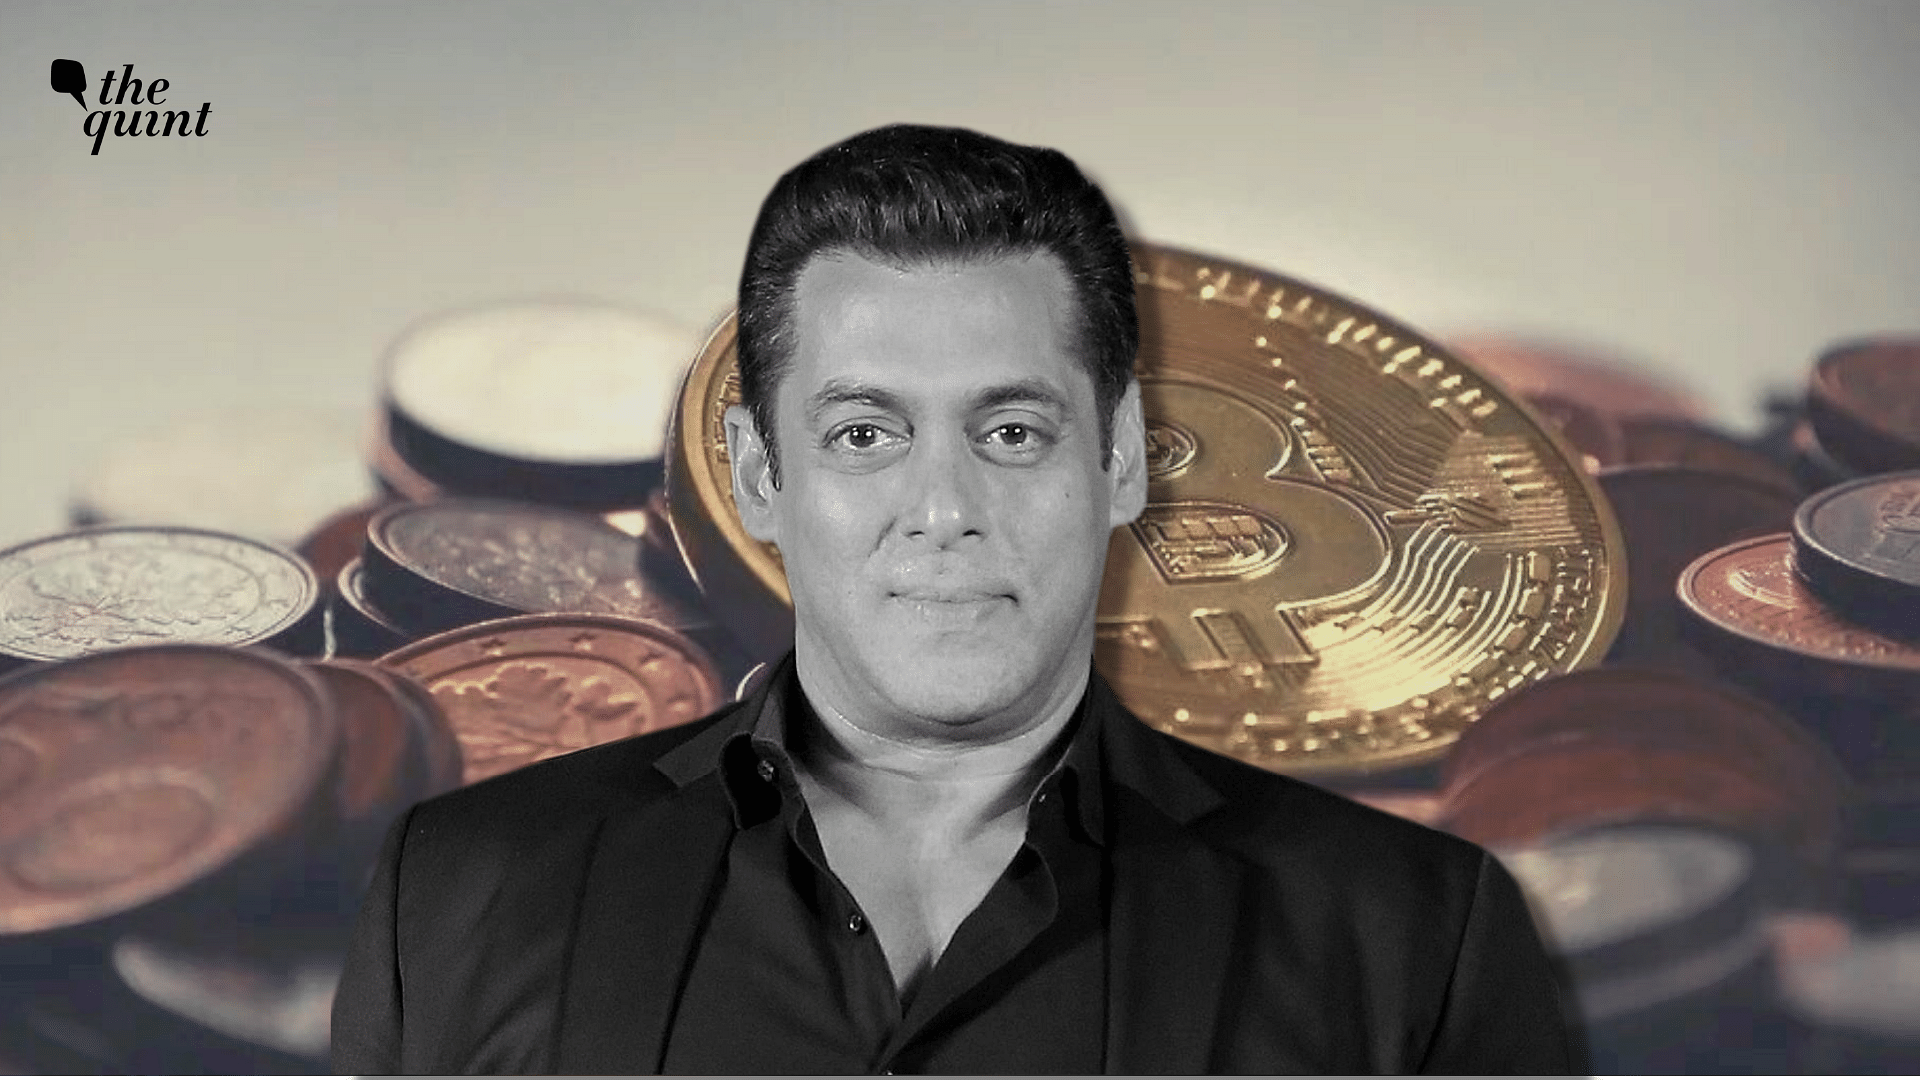 <div class="paragraphs"><p>Salman Khan took to Twitter on Wednesday, 13 October to announce that he will launch NFTs (non-fungible tokens) in partnership with BollyCoin in December 2021.</p></div>